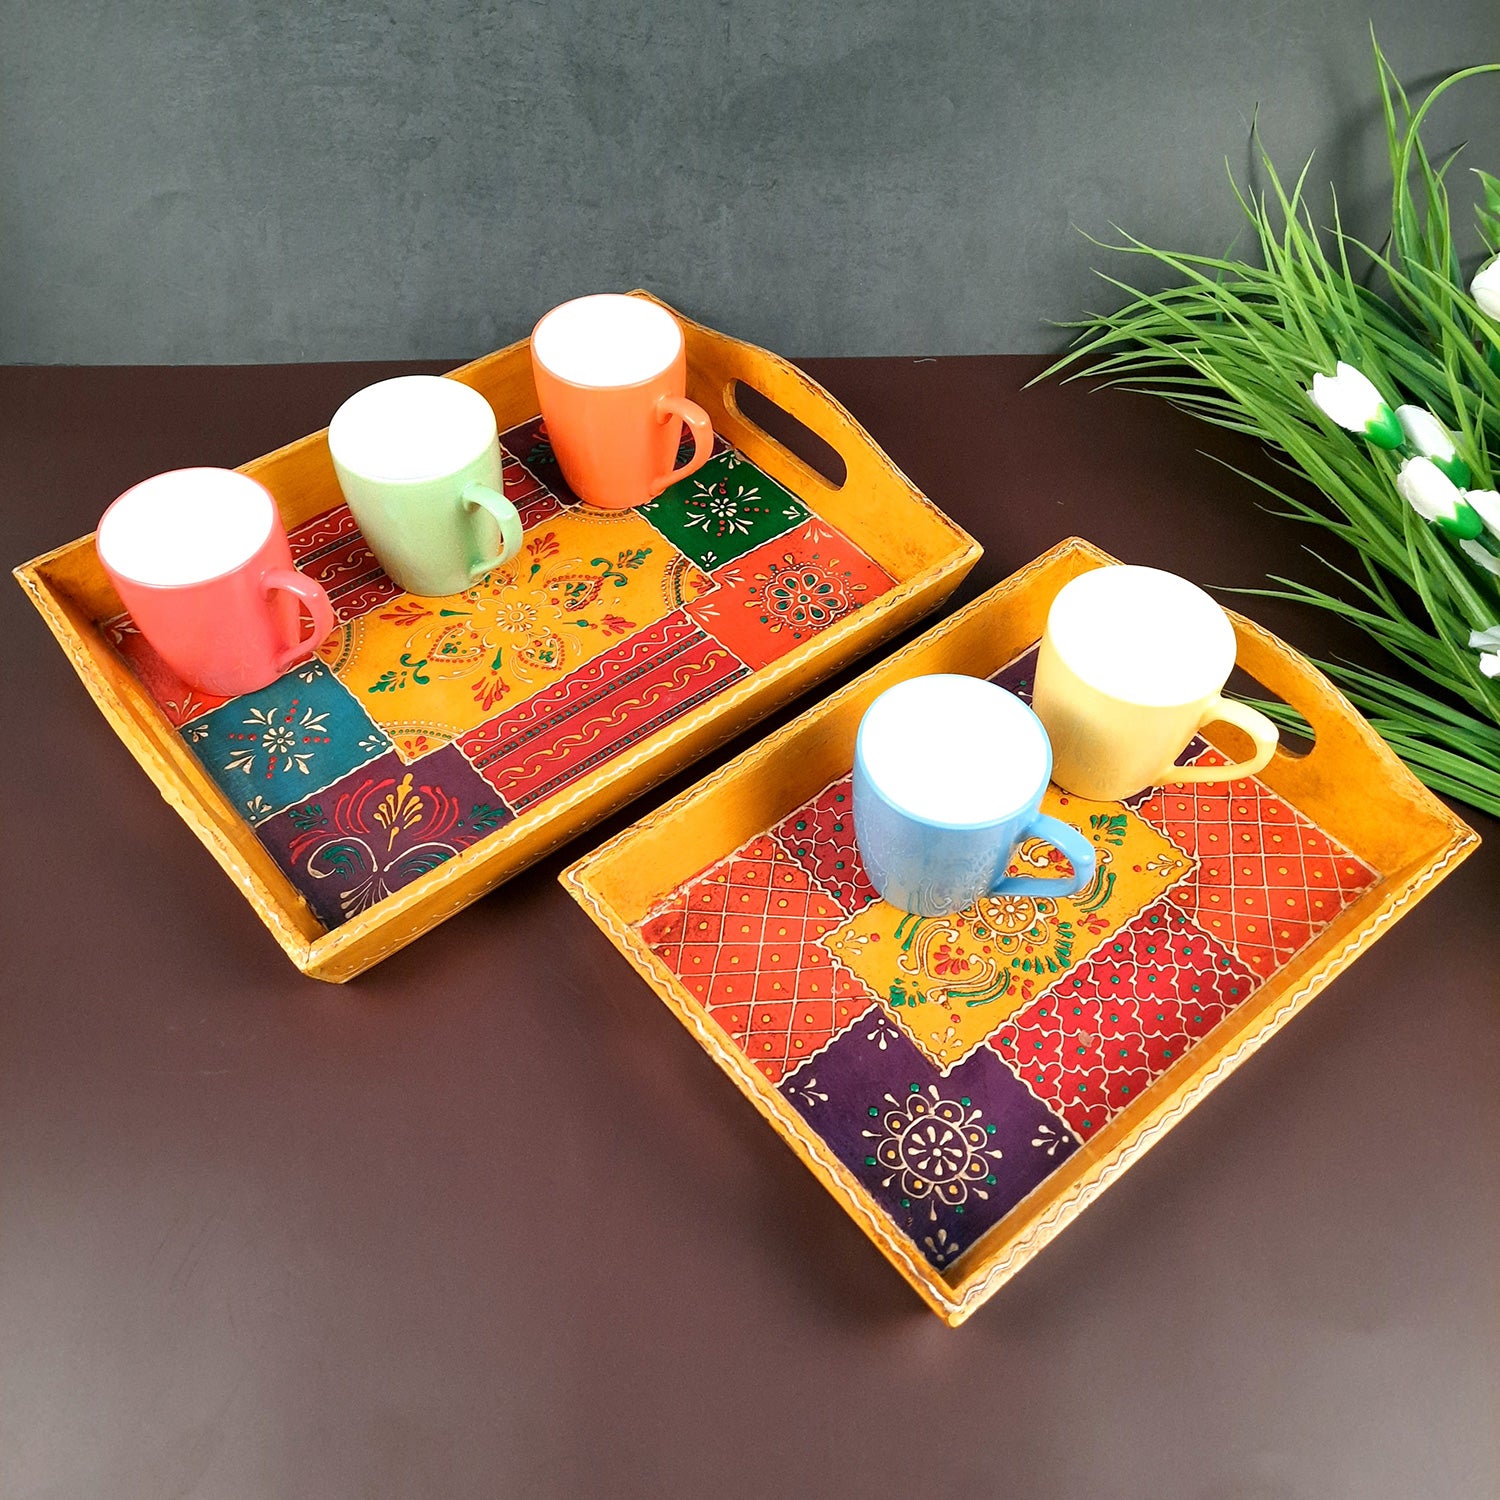 Wooden Tray | Serving Trays For Tea, Coffee & Snacks | Multipurpose Decorative Tray & Platters - For Home, Dining Table Organization, Kitchen & Gifts - Set of 2 - Apkamart